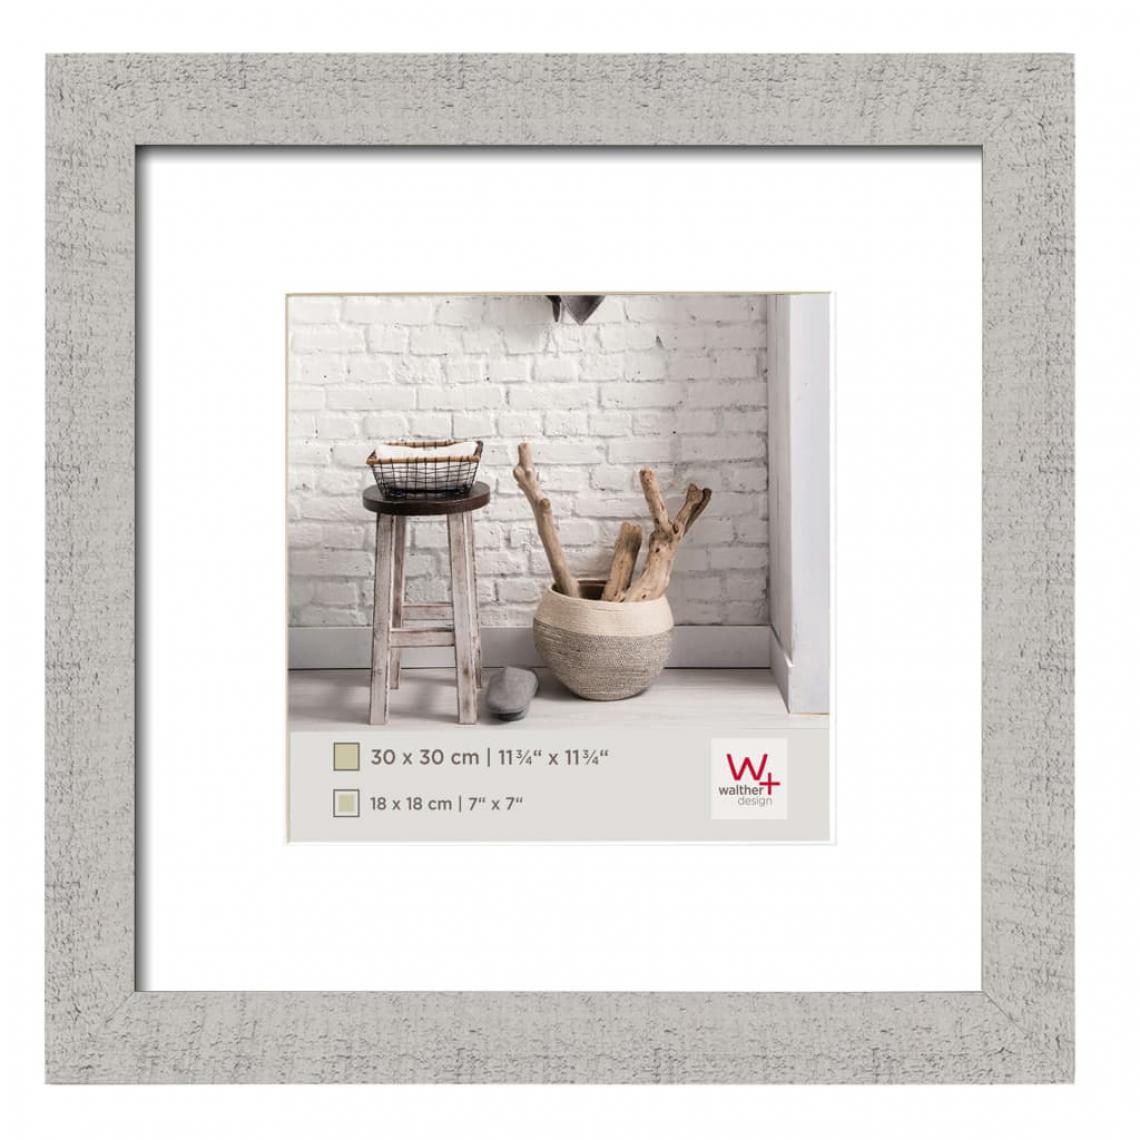 Walther - Walther Design Cadre photo Home 30x30 cm Gris clair - Cadres, pêle-mêle